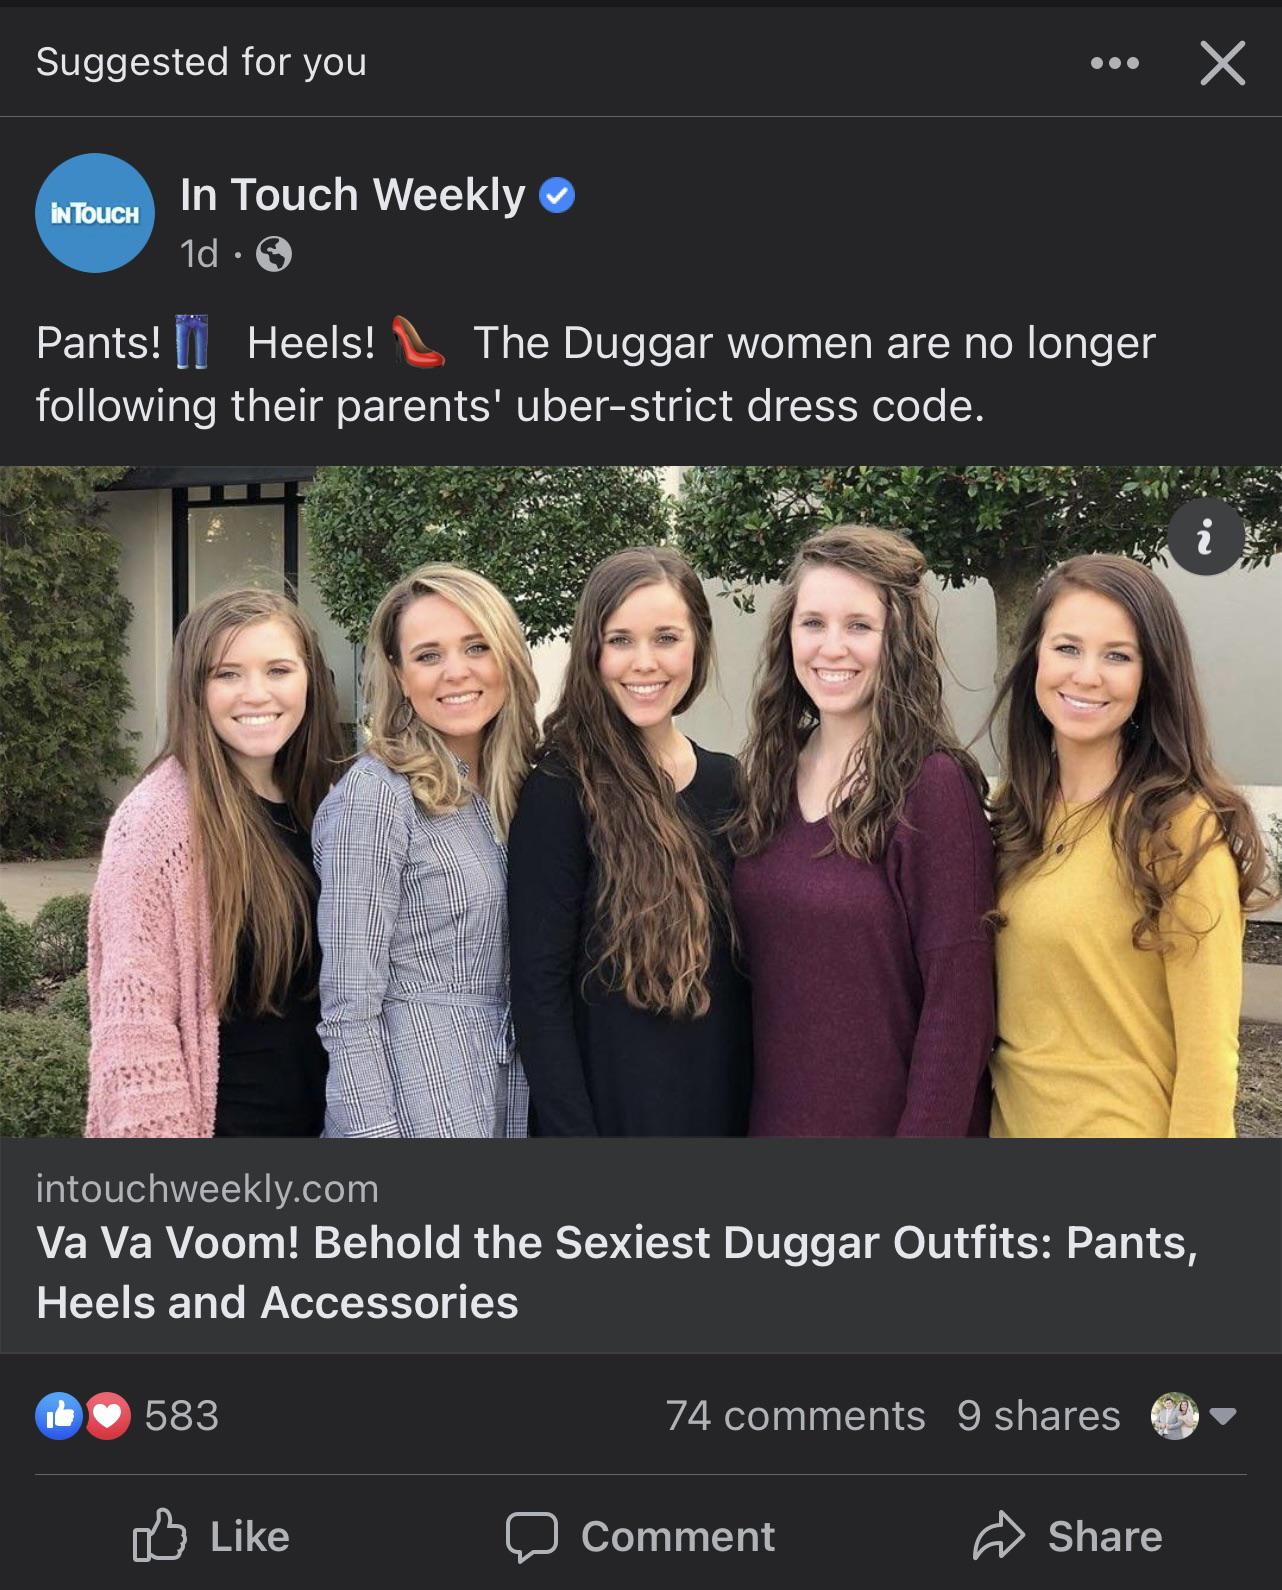 A media post about some members of Duggar family